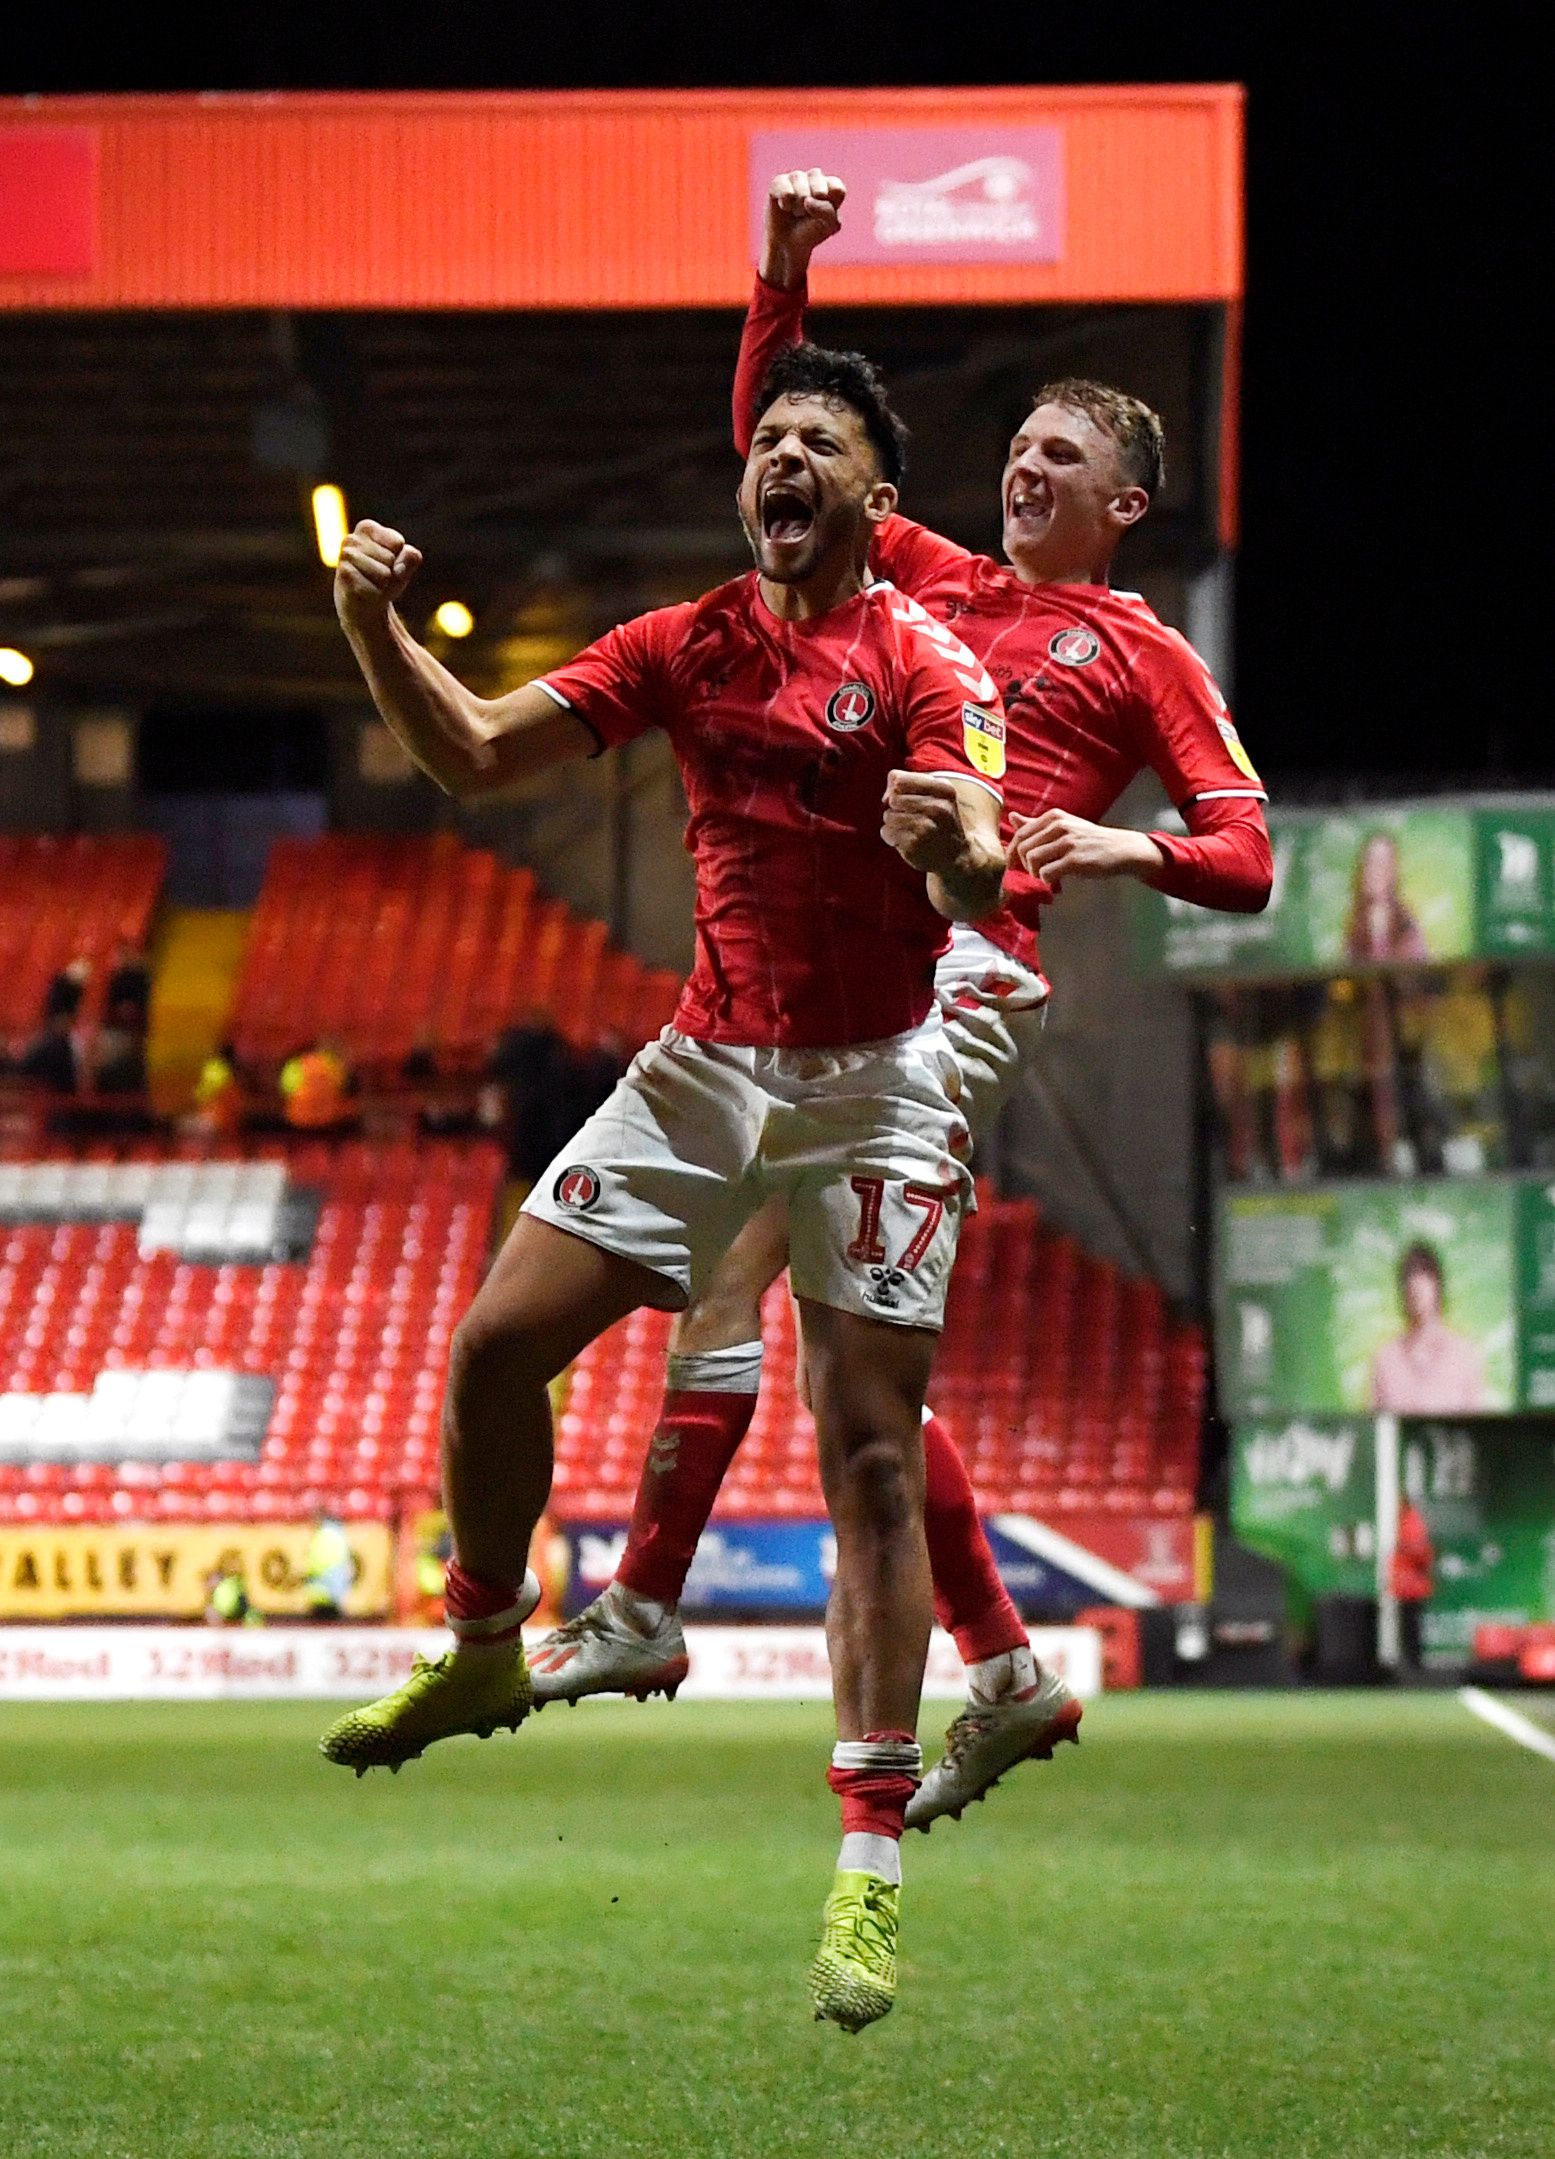 Soccer Football - Championship - Charlton Athletic v Bristol City - The Valley, London, Britain - December 26, 2019  Charlton's Macauley Bonne and Alfie Doughty celebrate after the match   Action Images/Tony O'Brien  EDITORIAL USE ONLY. No use with unauthorized audio, video, data, fixture lists, club/league logos or 